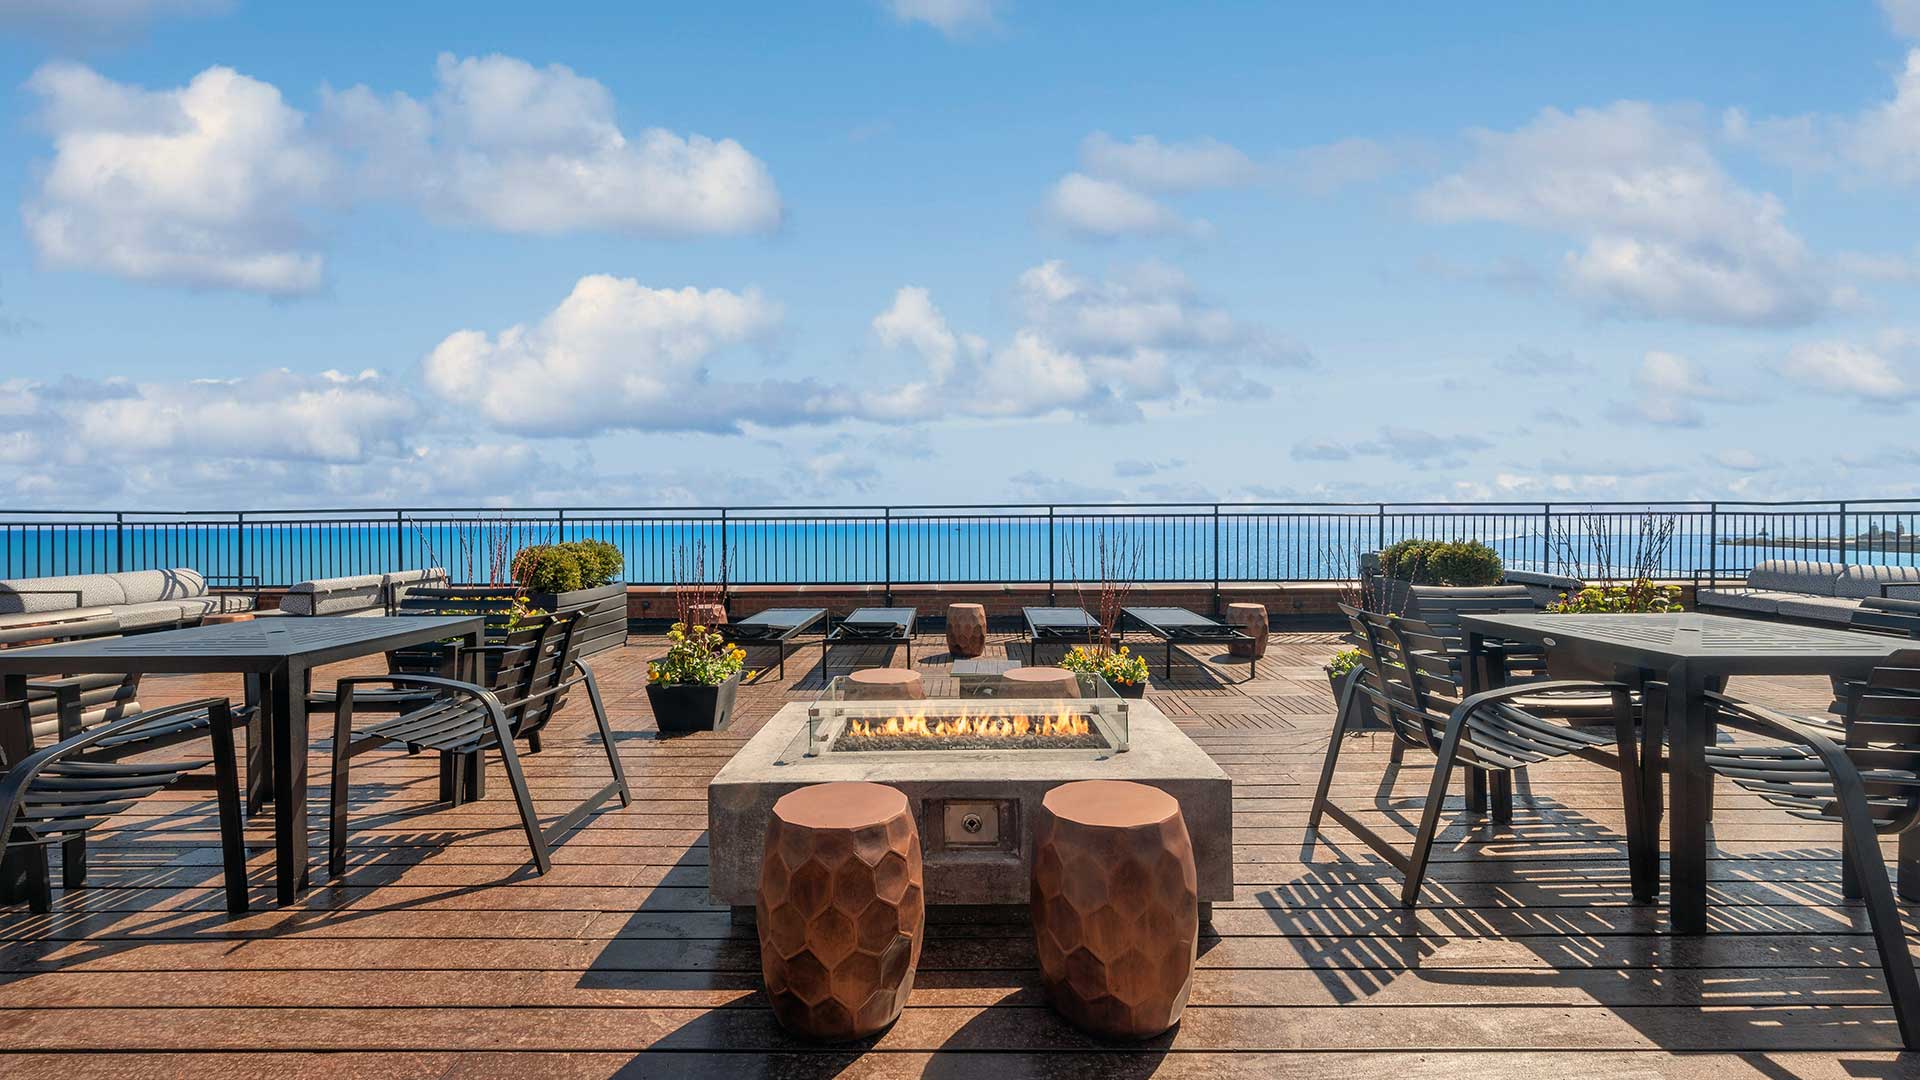 Looking across the rooftop deck firepit at Lake Michigan on a partly cloudy day. Outdoor dining sets sit on either side.